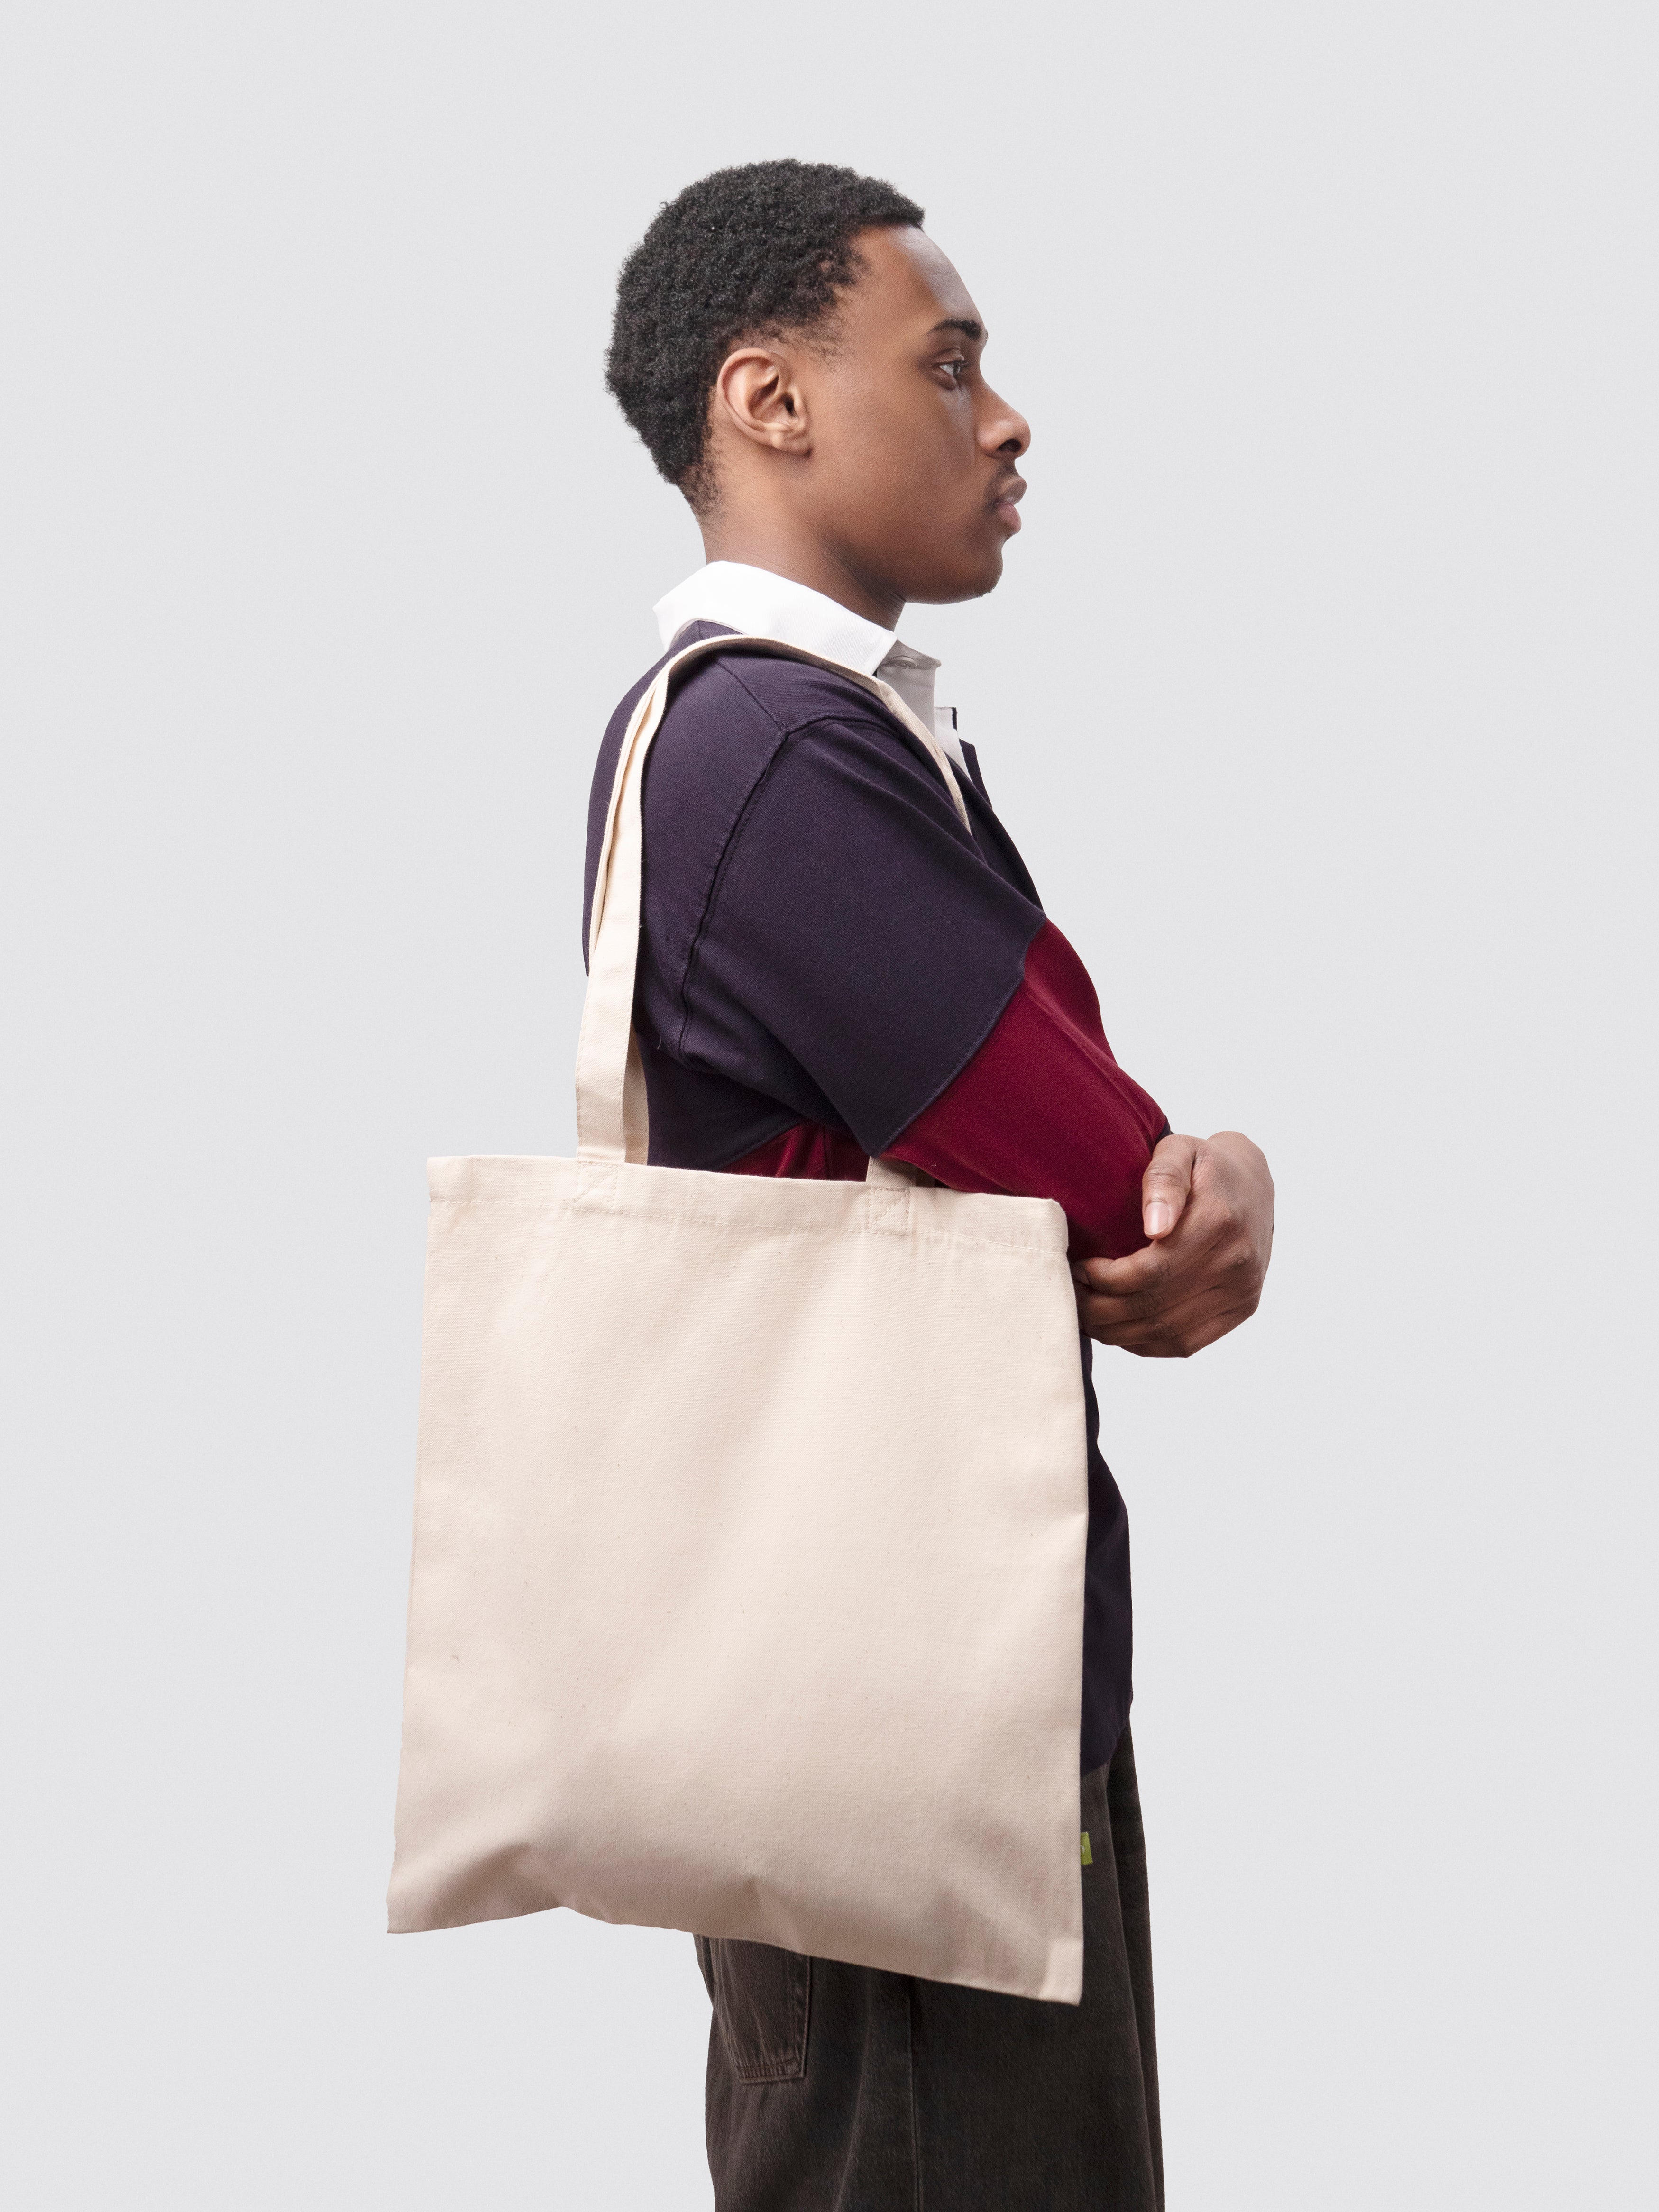 Natural student tote bag for life, made from eco-friendly organic cotton